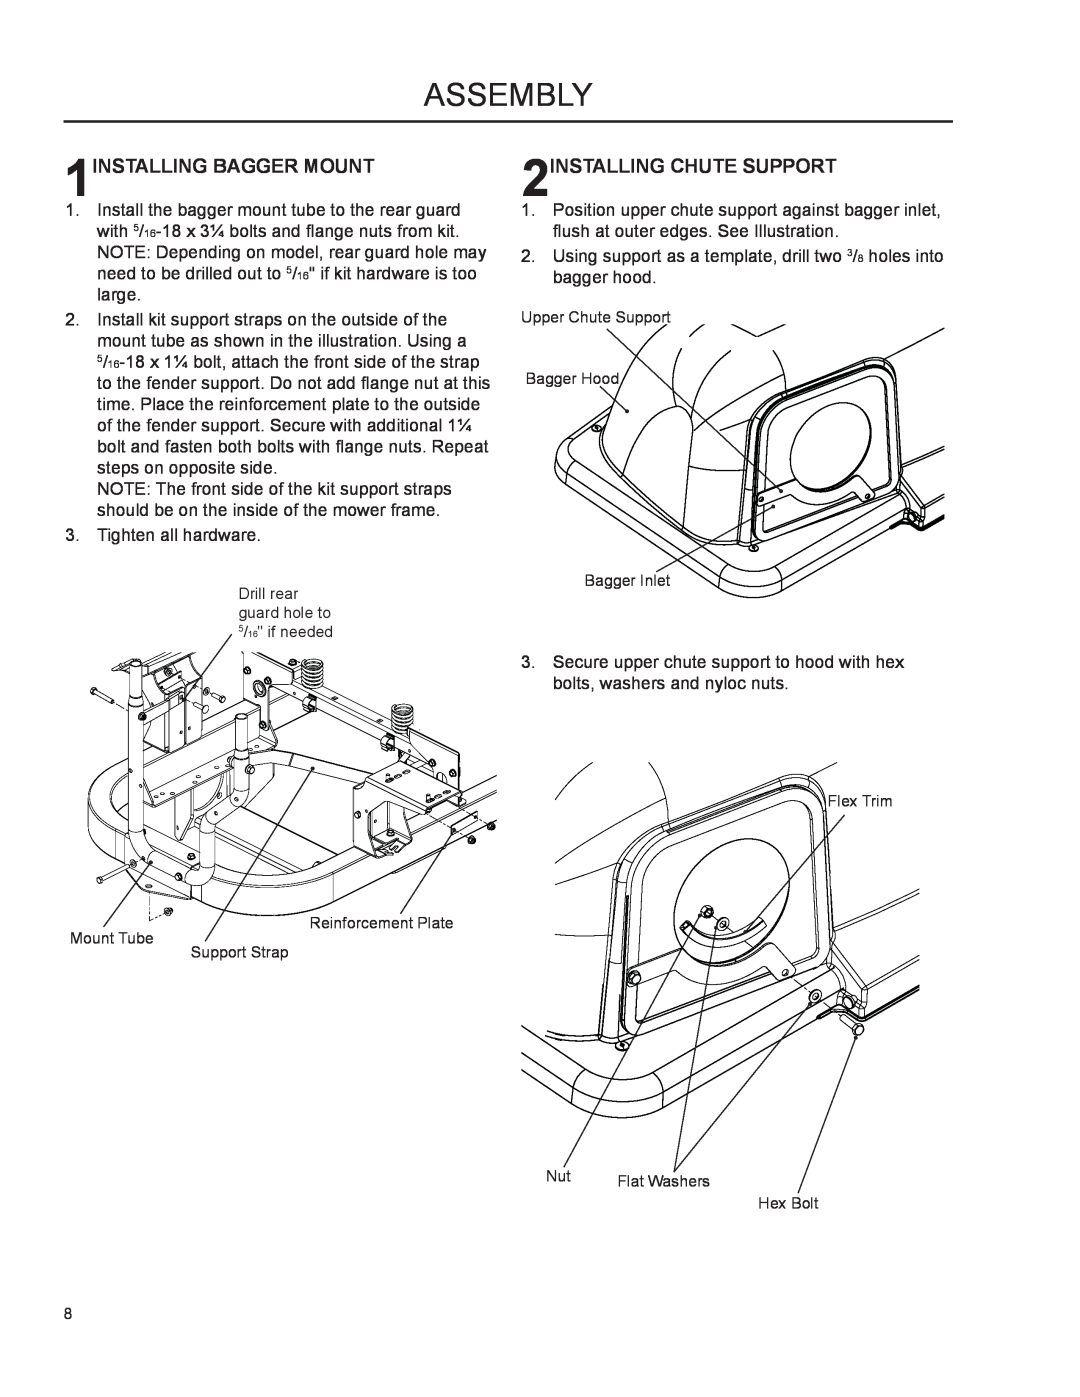 Dixon 966 004201 manual Assembly, 1INSTALLING BAGGER MOUNT, 2INSTALLING CHUTE SUPPORT 